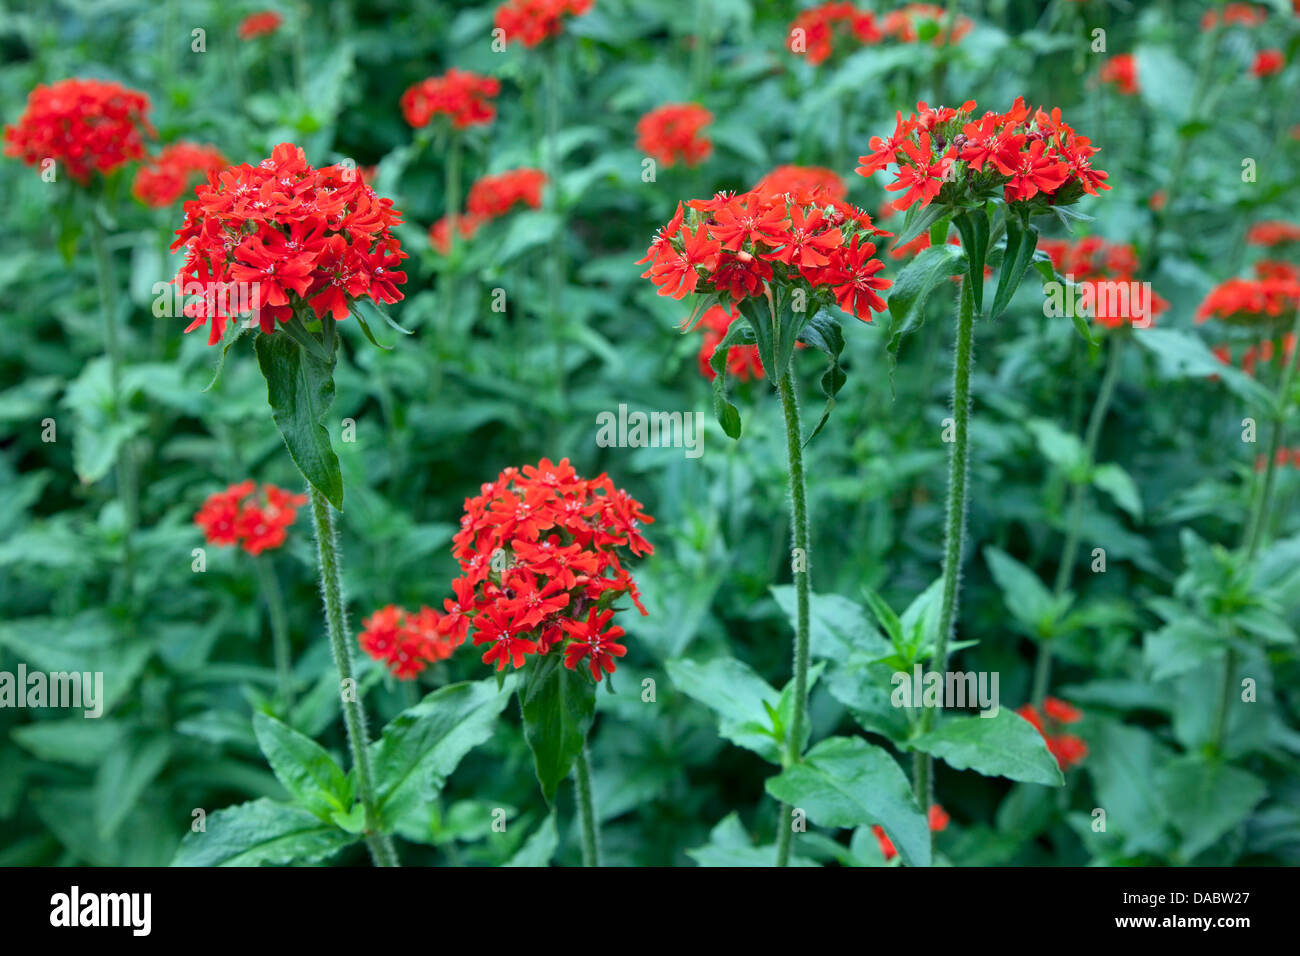 Maltese Cross Flowers Lychnis chalcedonica in Herbaceous bed July Stock Photo